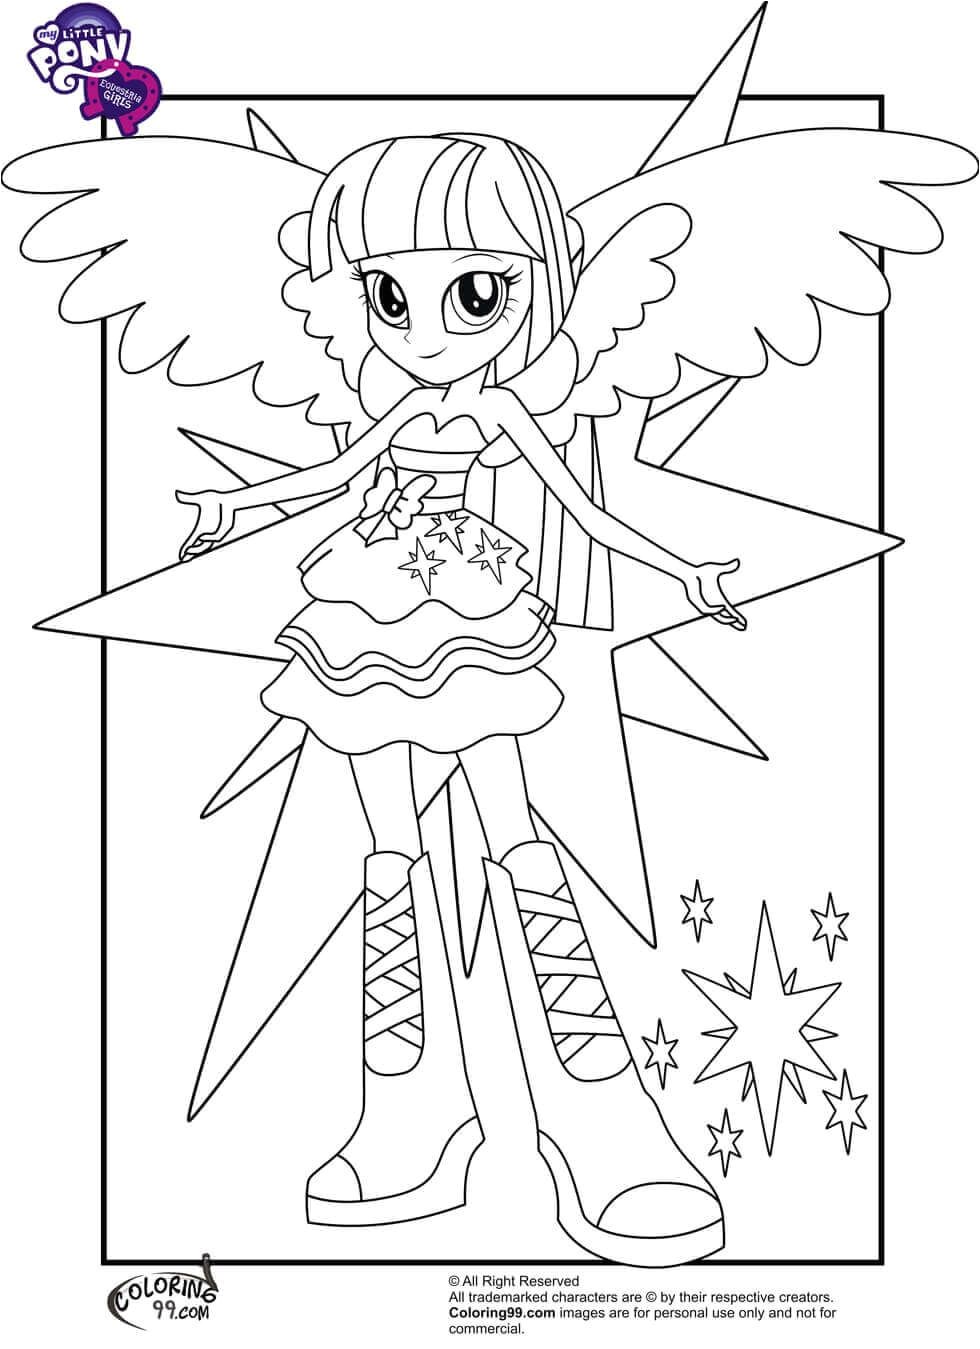 Coloriage My Little Pony Equestria Girl Rainbow Rocks Twilight Sparkle From My Little Pony Equestria Girls Coloring Page